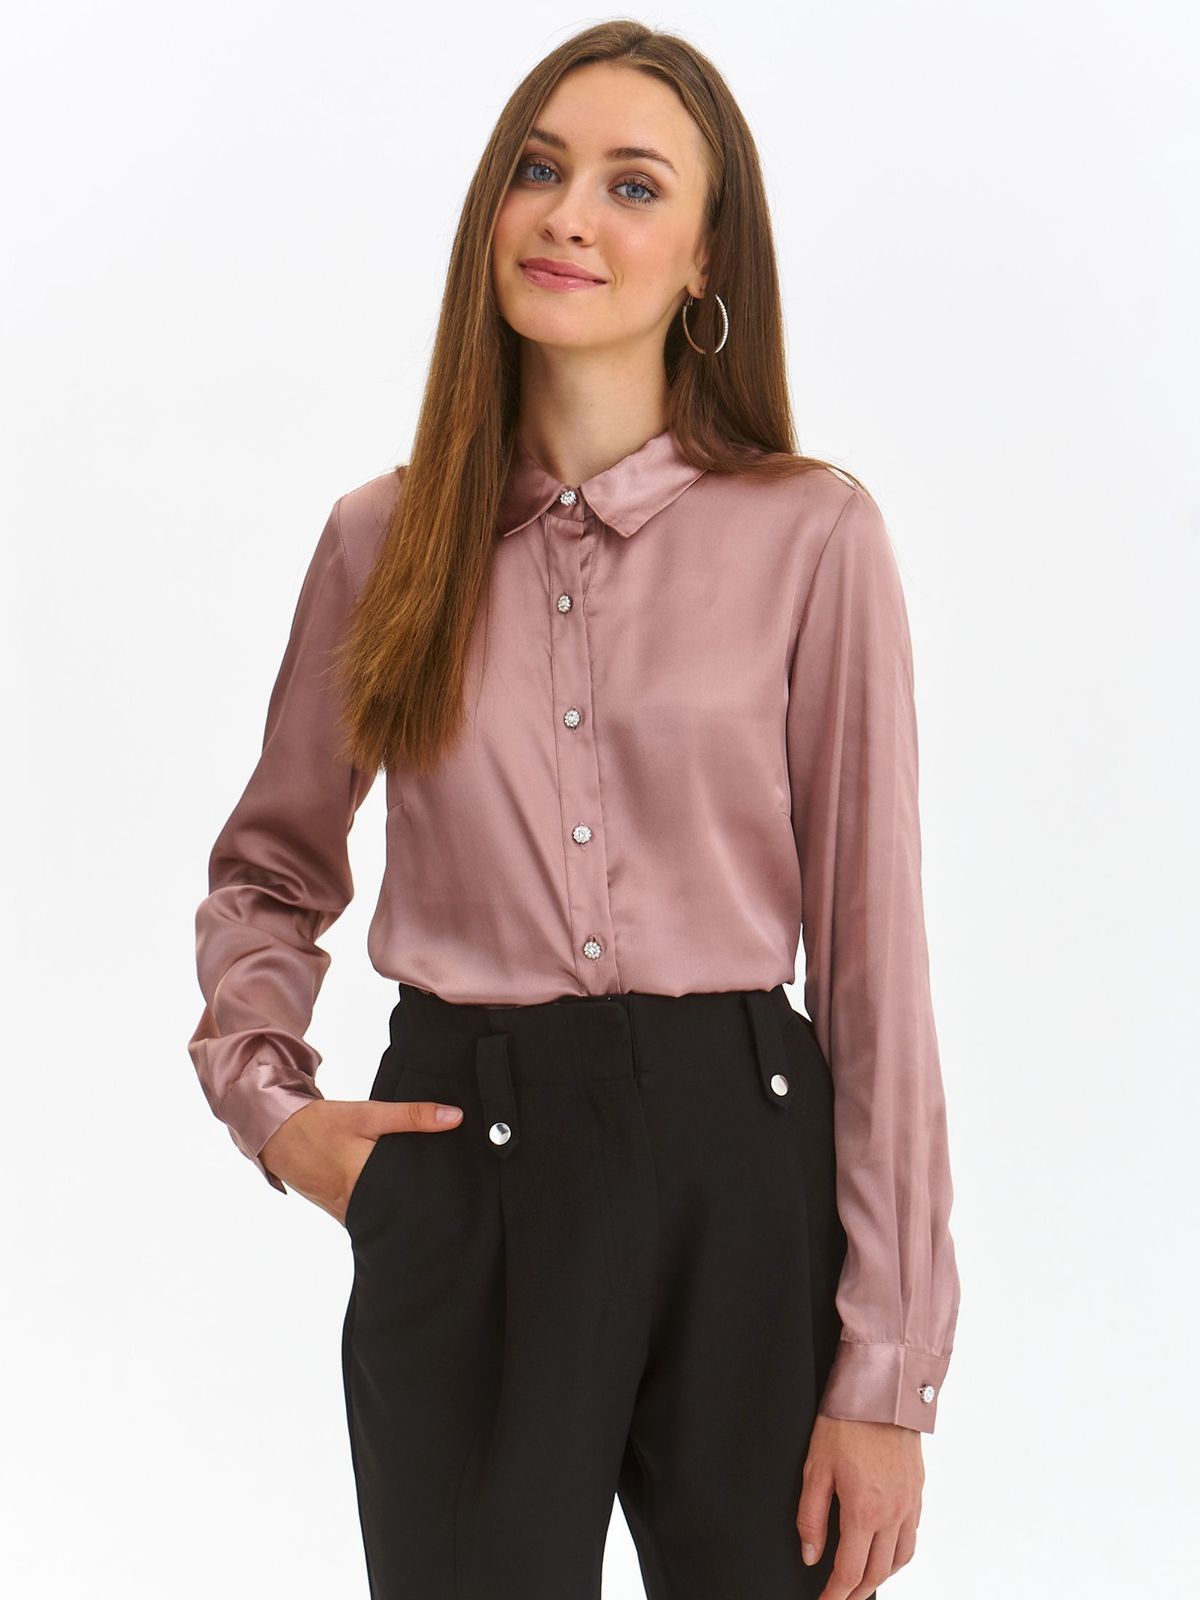 Lightpink women`s shirt from satin loose fit with decorative buttons